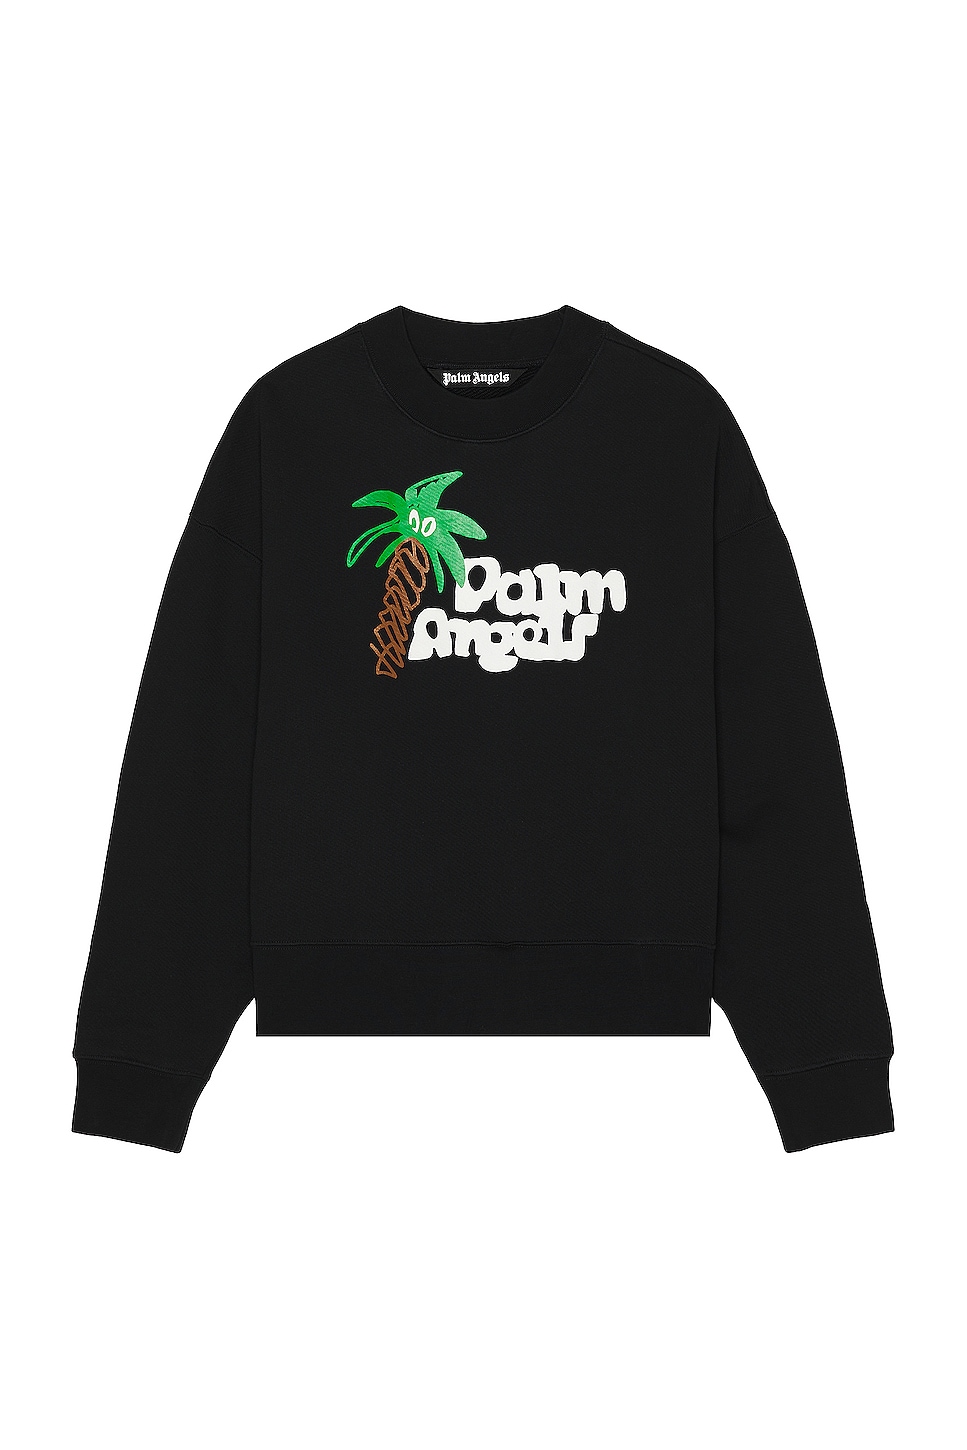 Palm Angels Sketchy Classic Sweater in Black